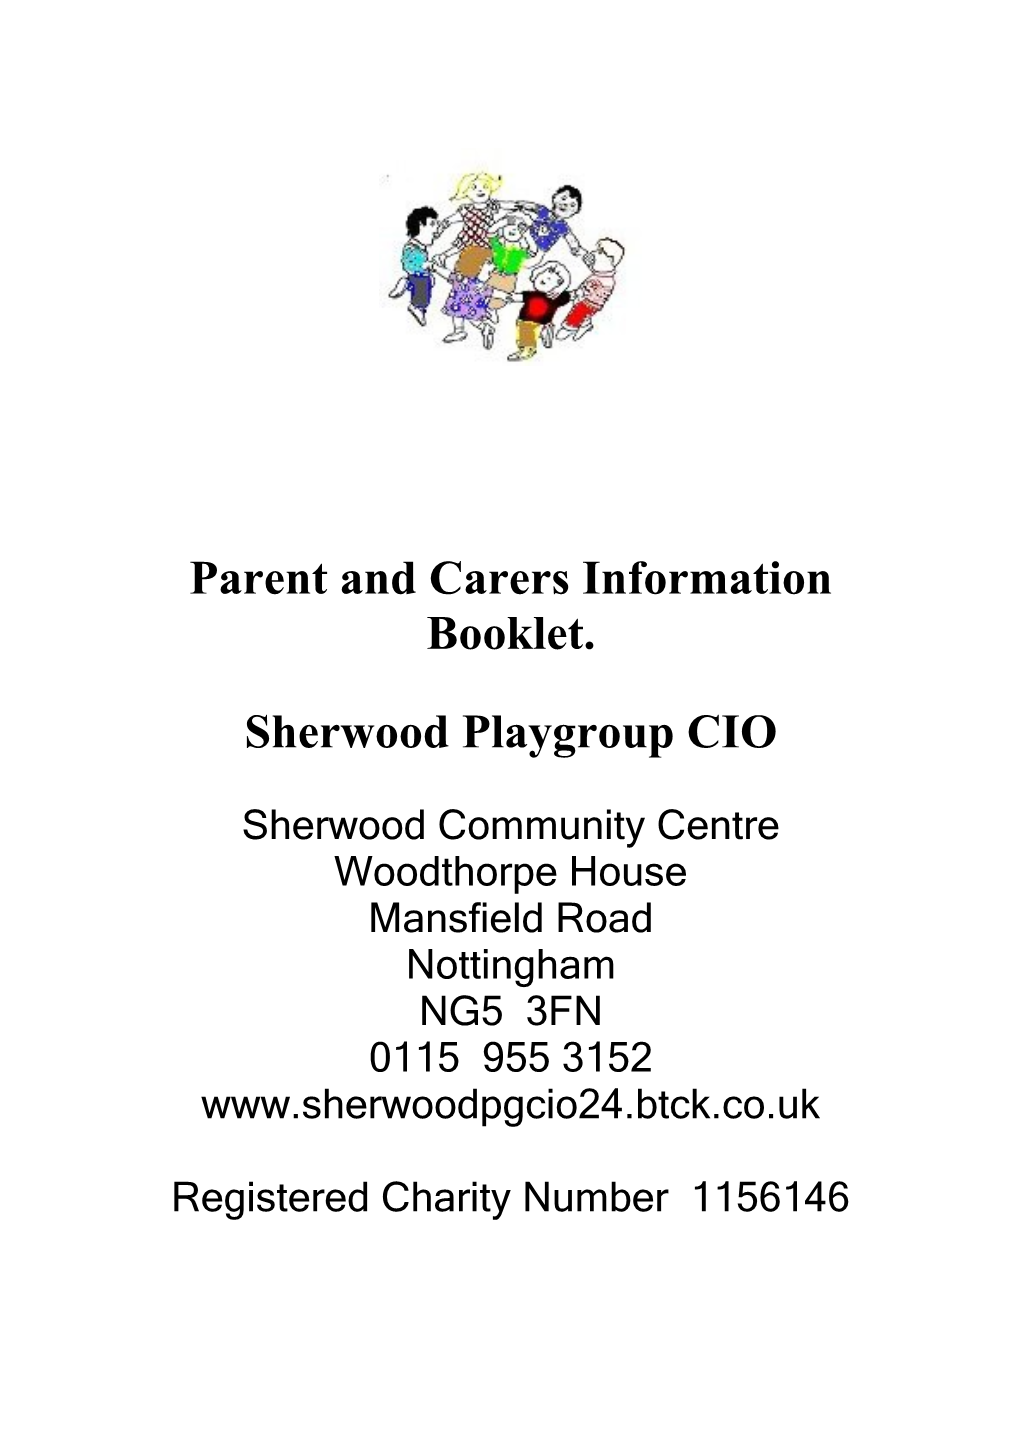 Parent and Carers Information Booklet